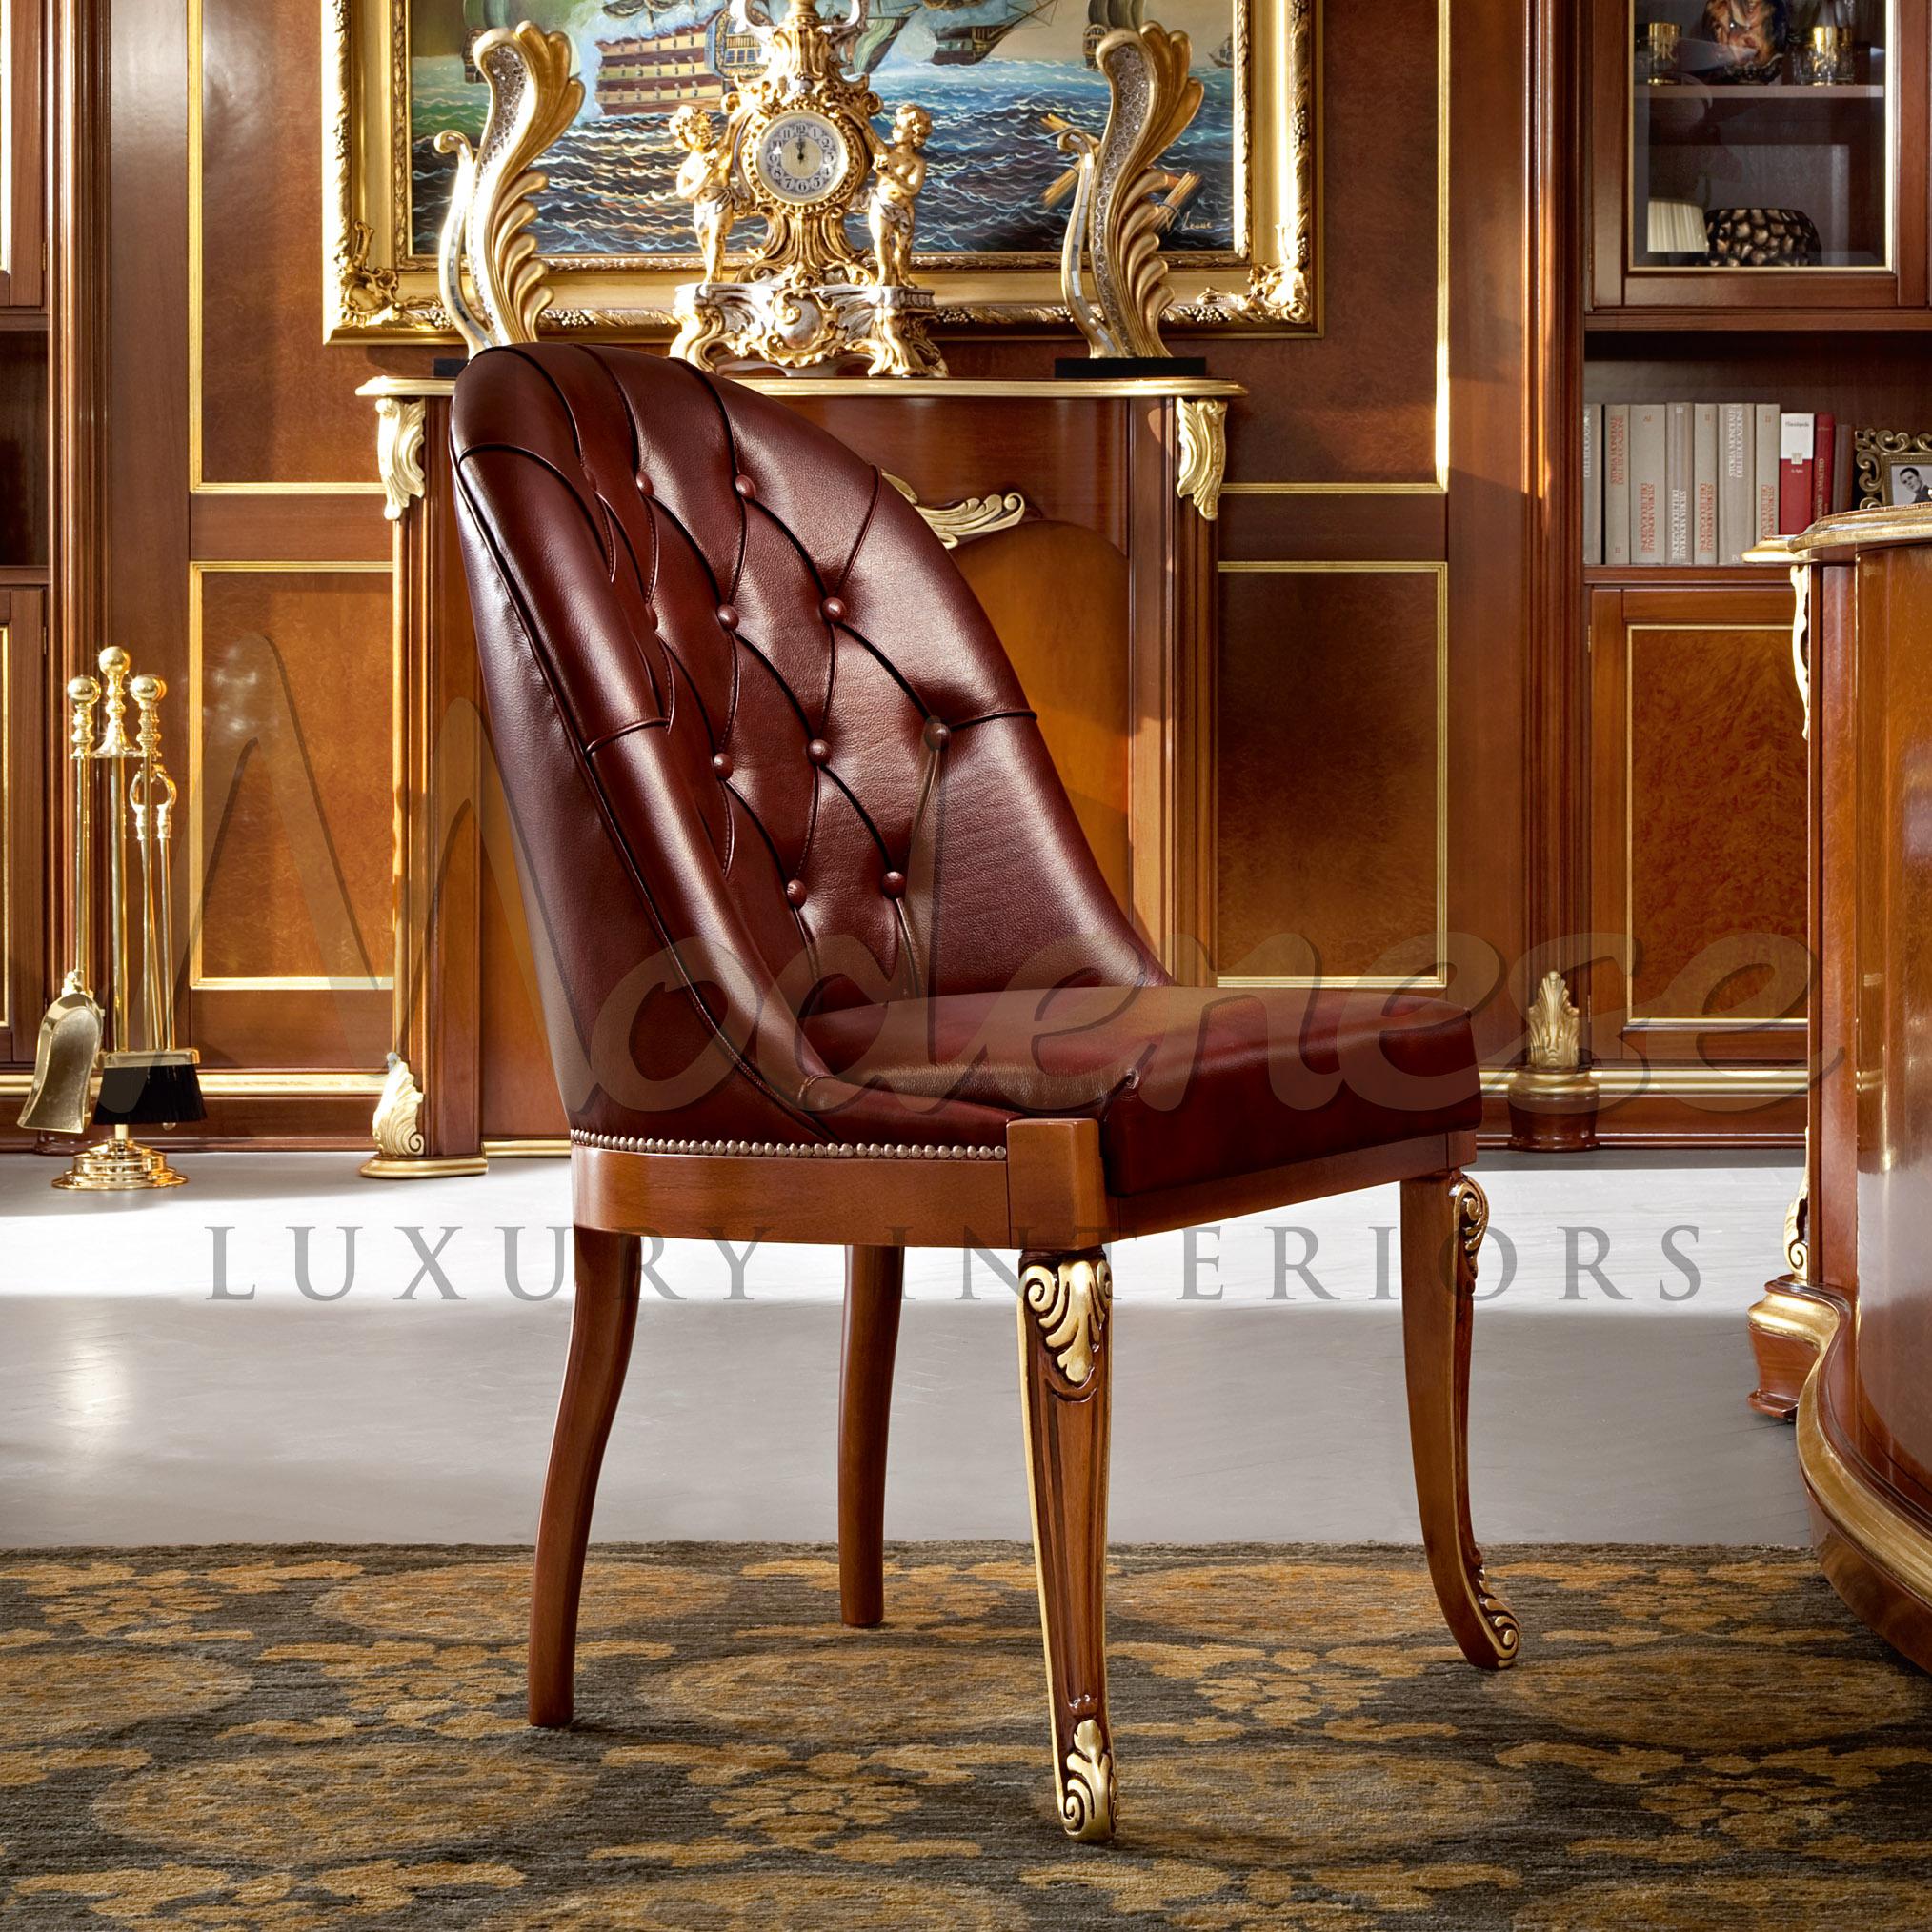 Put your guests at ease by letting them seat on this real bordeaux leather executive office guest chair by Modenese Luxury Interiors, embellished by a capitonne backrest and gold leaf carvings. 
This piece is part of the bespoke set of Modenese